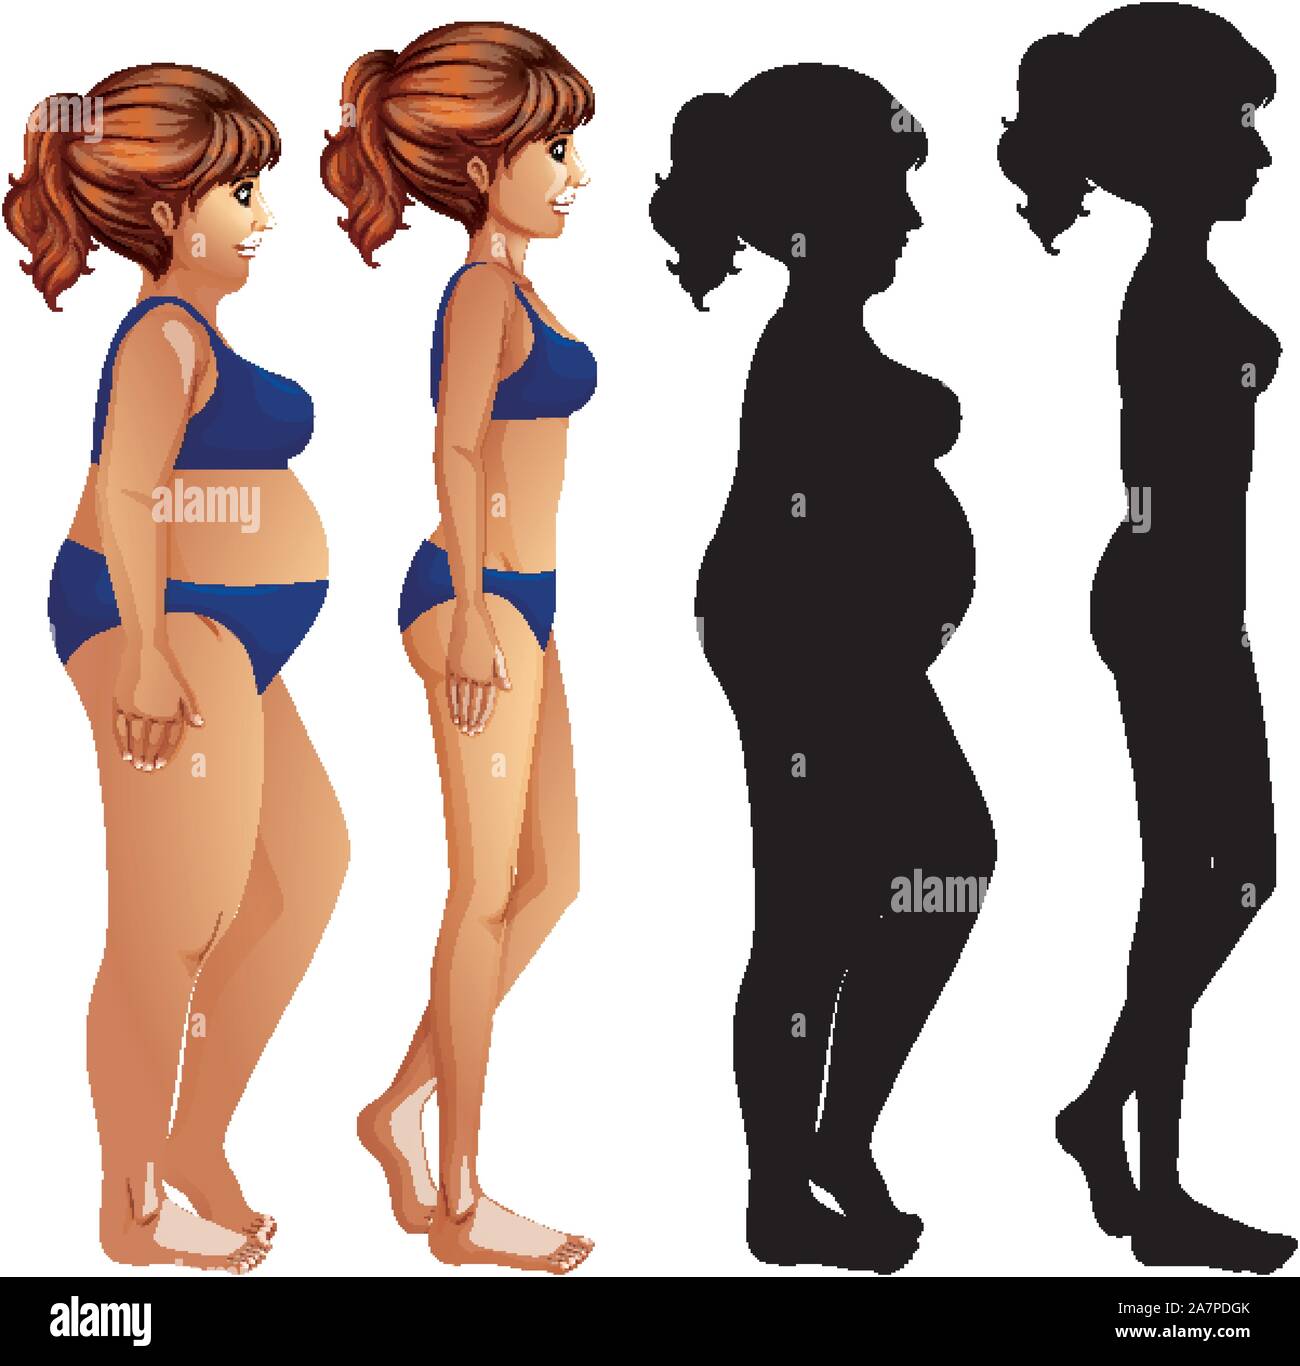 Skinny and fat women with sillhouette on white background illustration Stock Vector